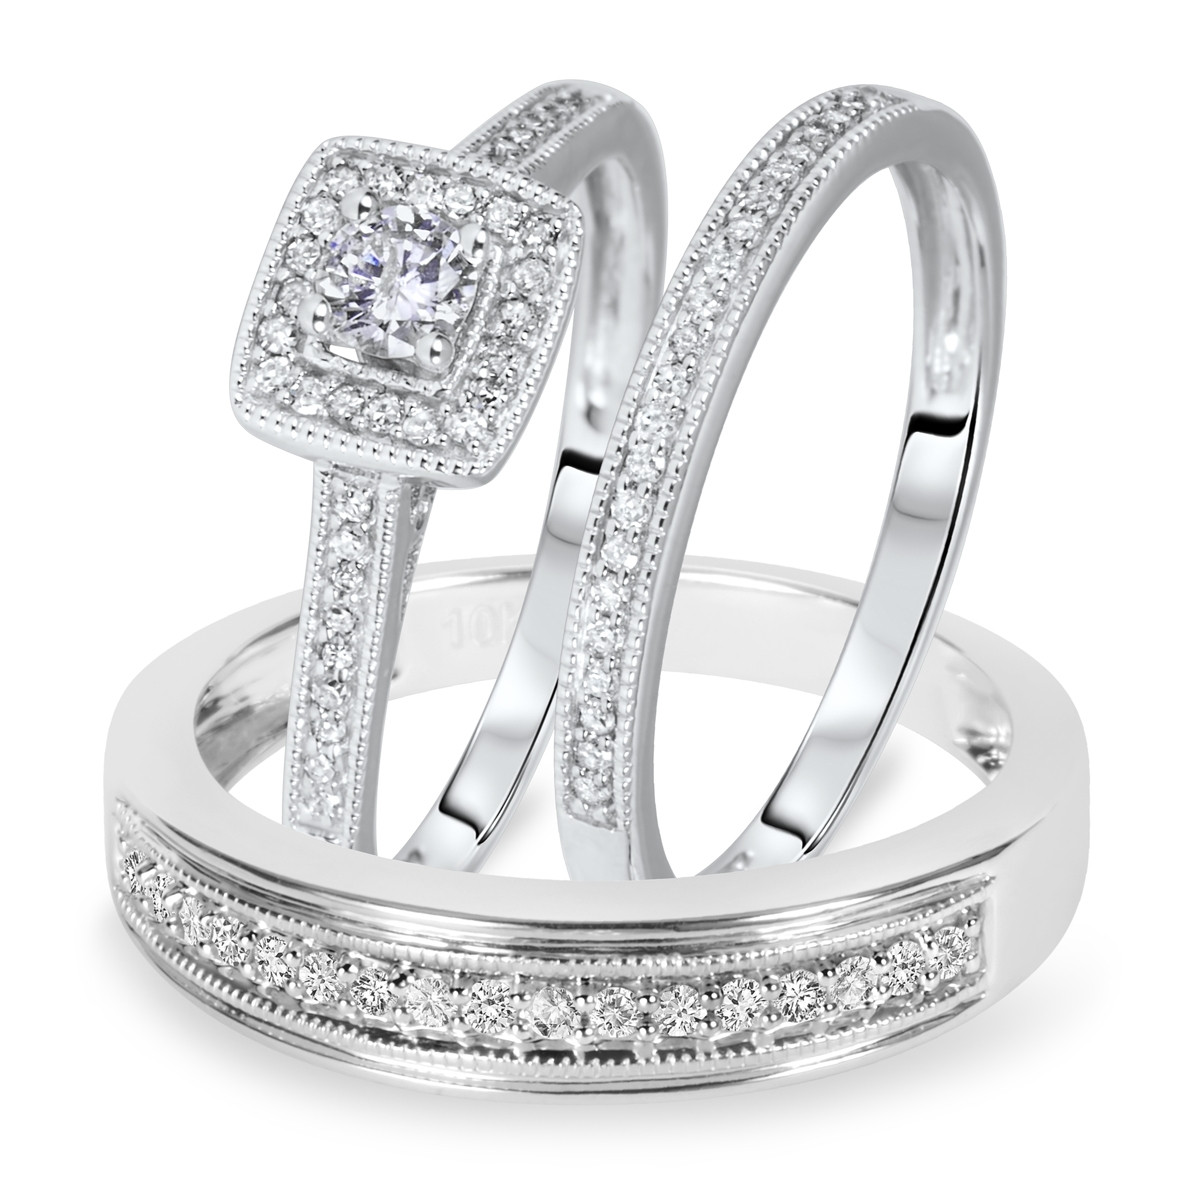 Cheap Wedding Ring Sets His And Hers
 His And Her Wedding Ring Sets Under 500